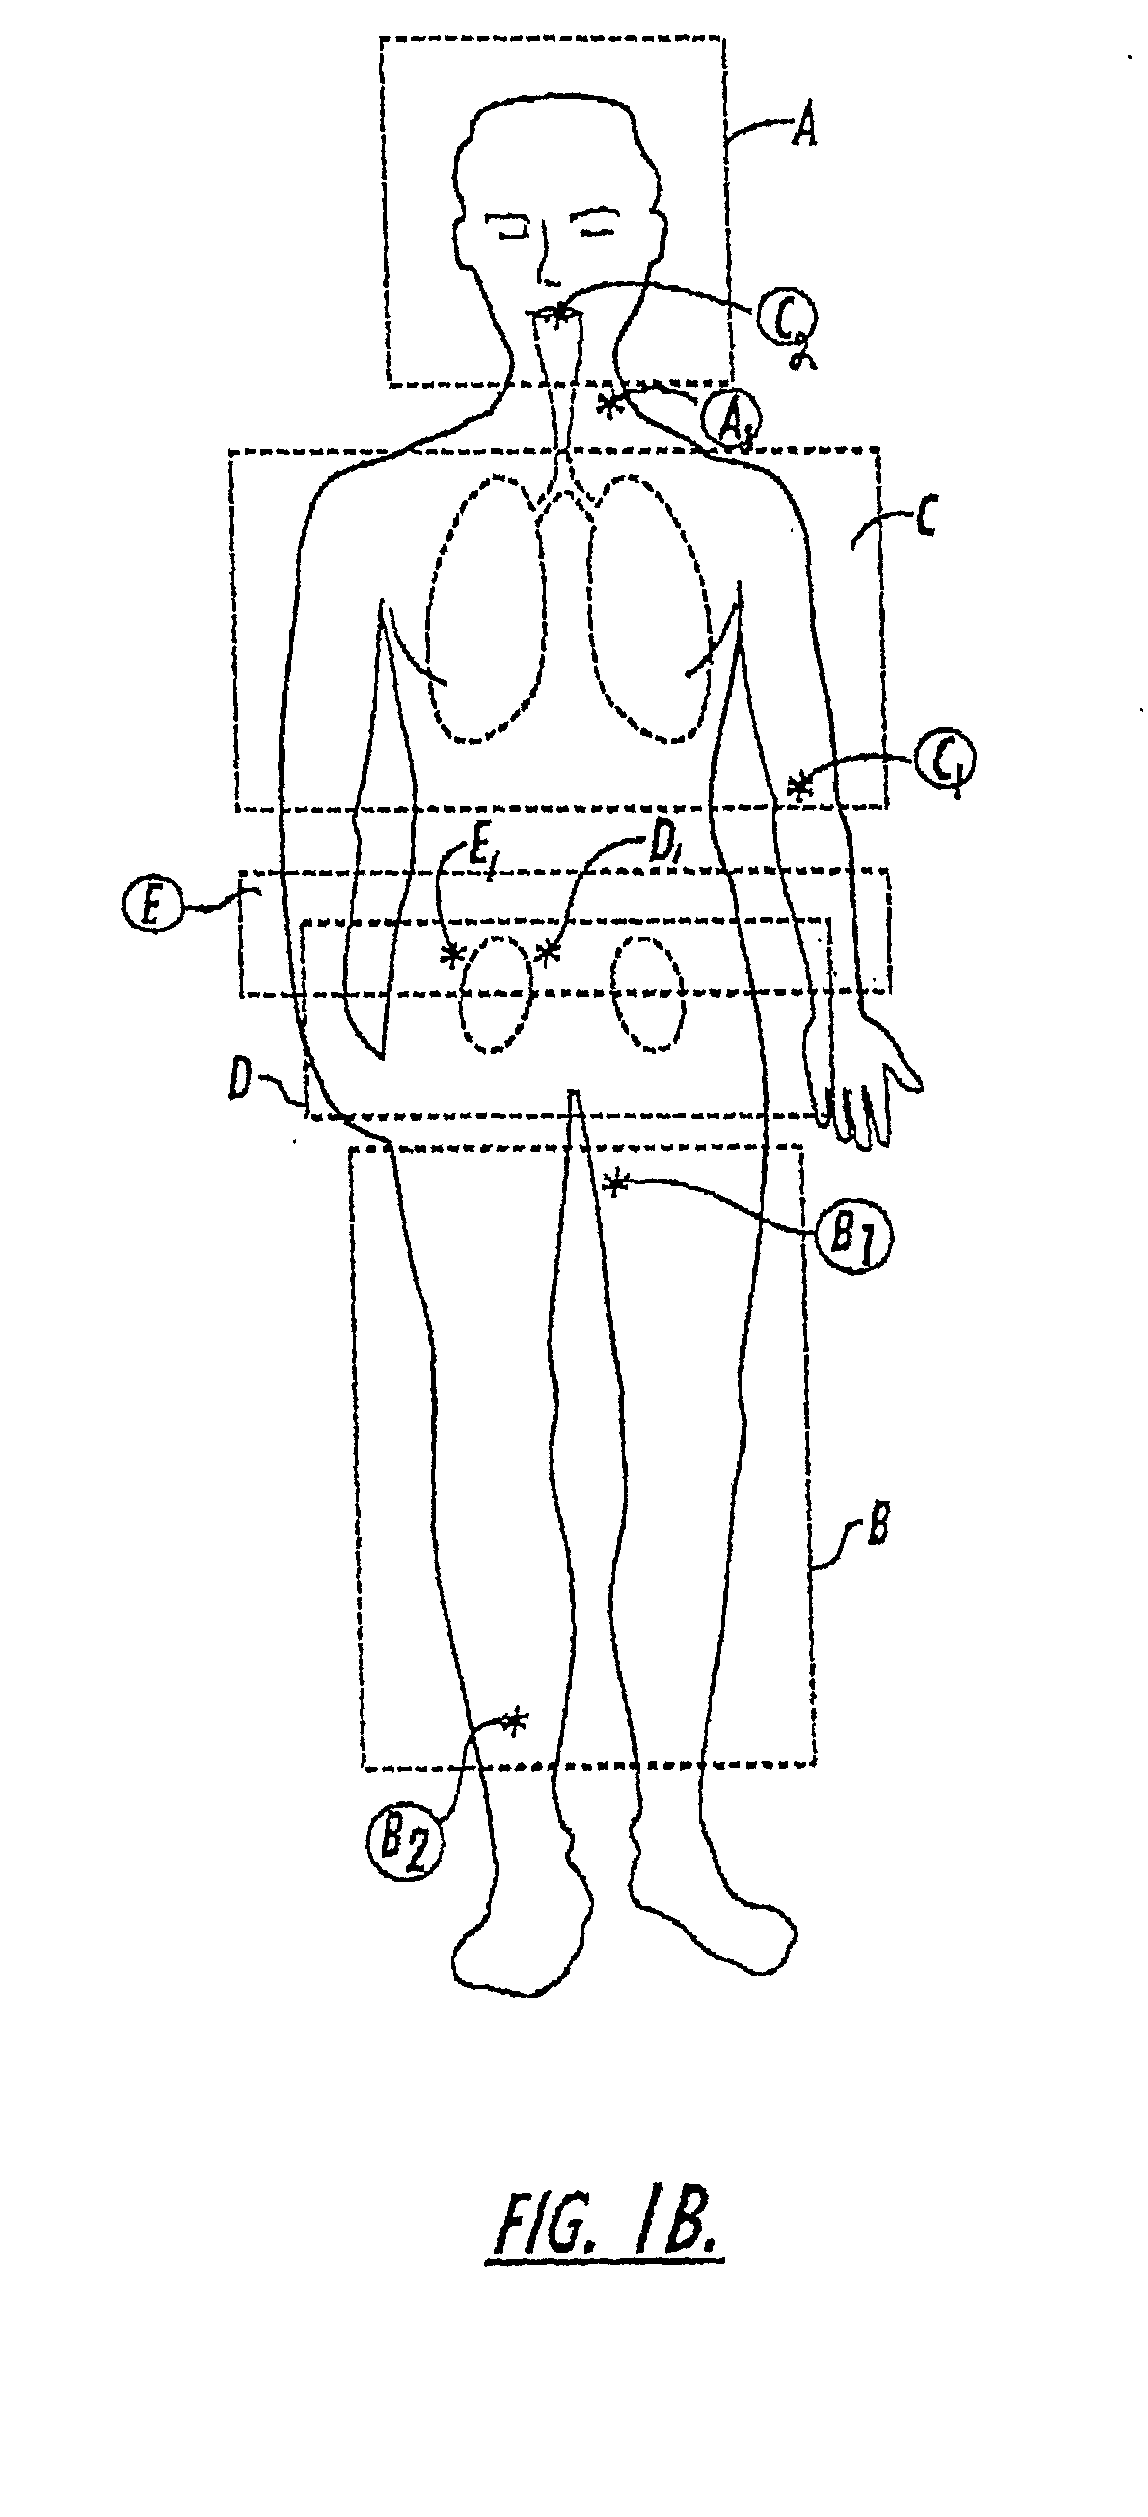 Diagnostic procedures using direct injection of gaseous hyperpolarized 129Xe and associated systems and products